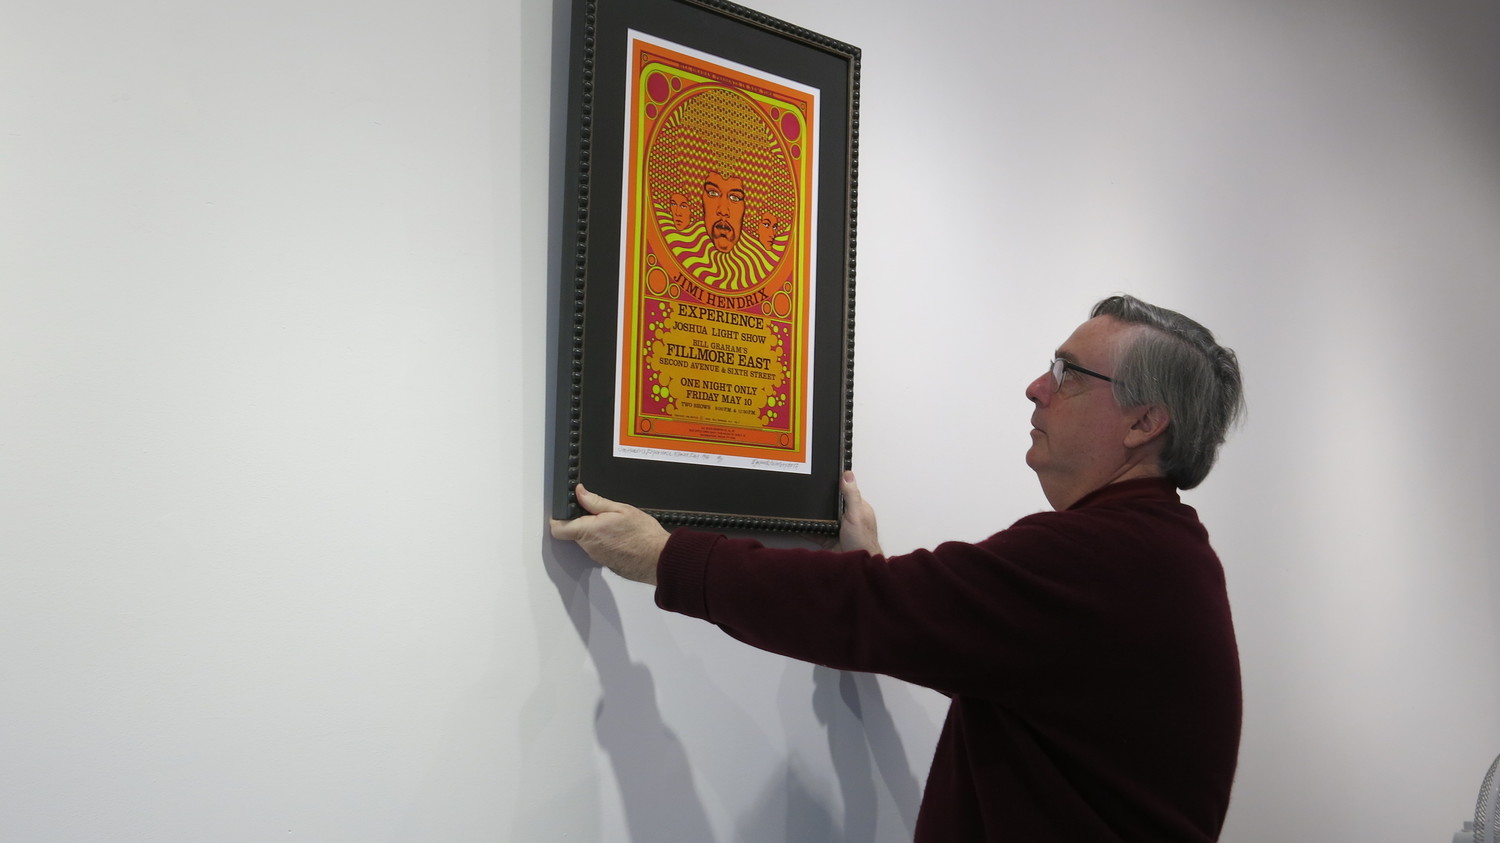 Ted Bahr, the owner of Oyster Bay’s Bahr Gallery, has all kinds of psy-
chedelic concert posters available for purchase or viewing.